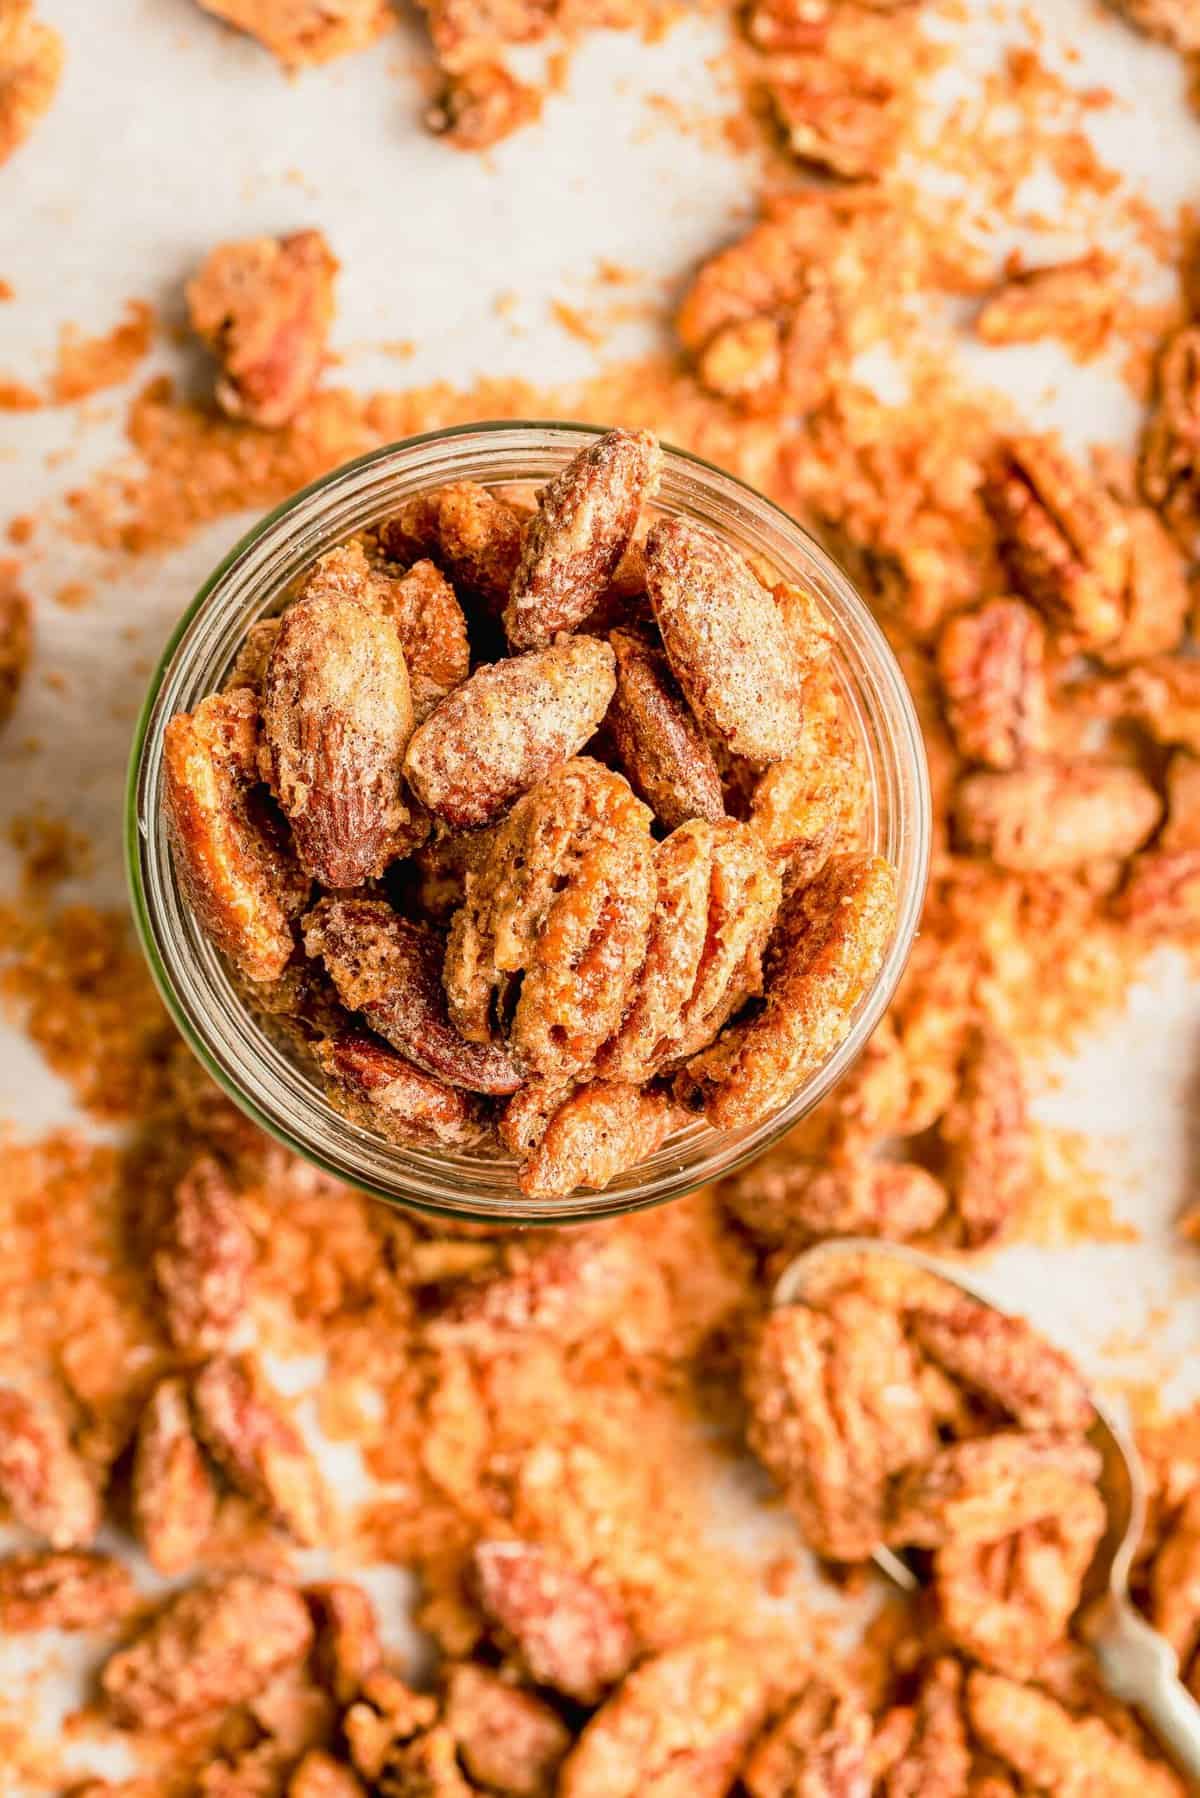 Overhead view of maple cinnamon spiced nuts in glass jar